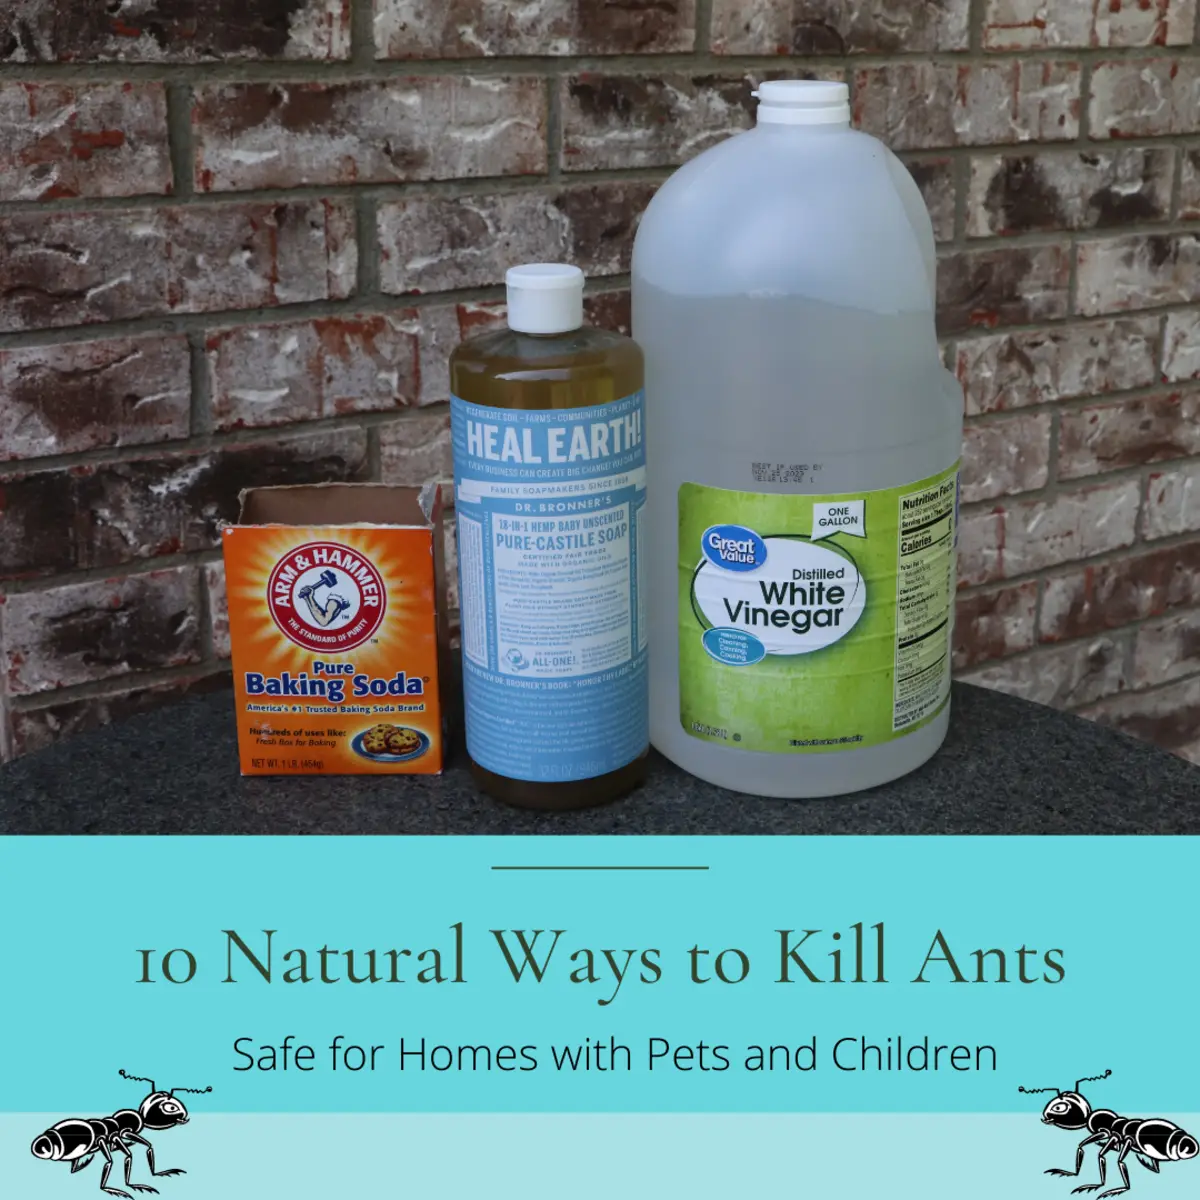 How to Get Rid of Ants Without Toxic Chemicals